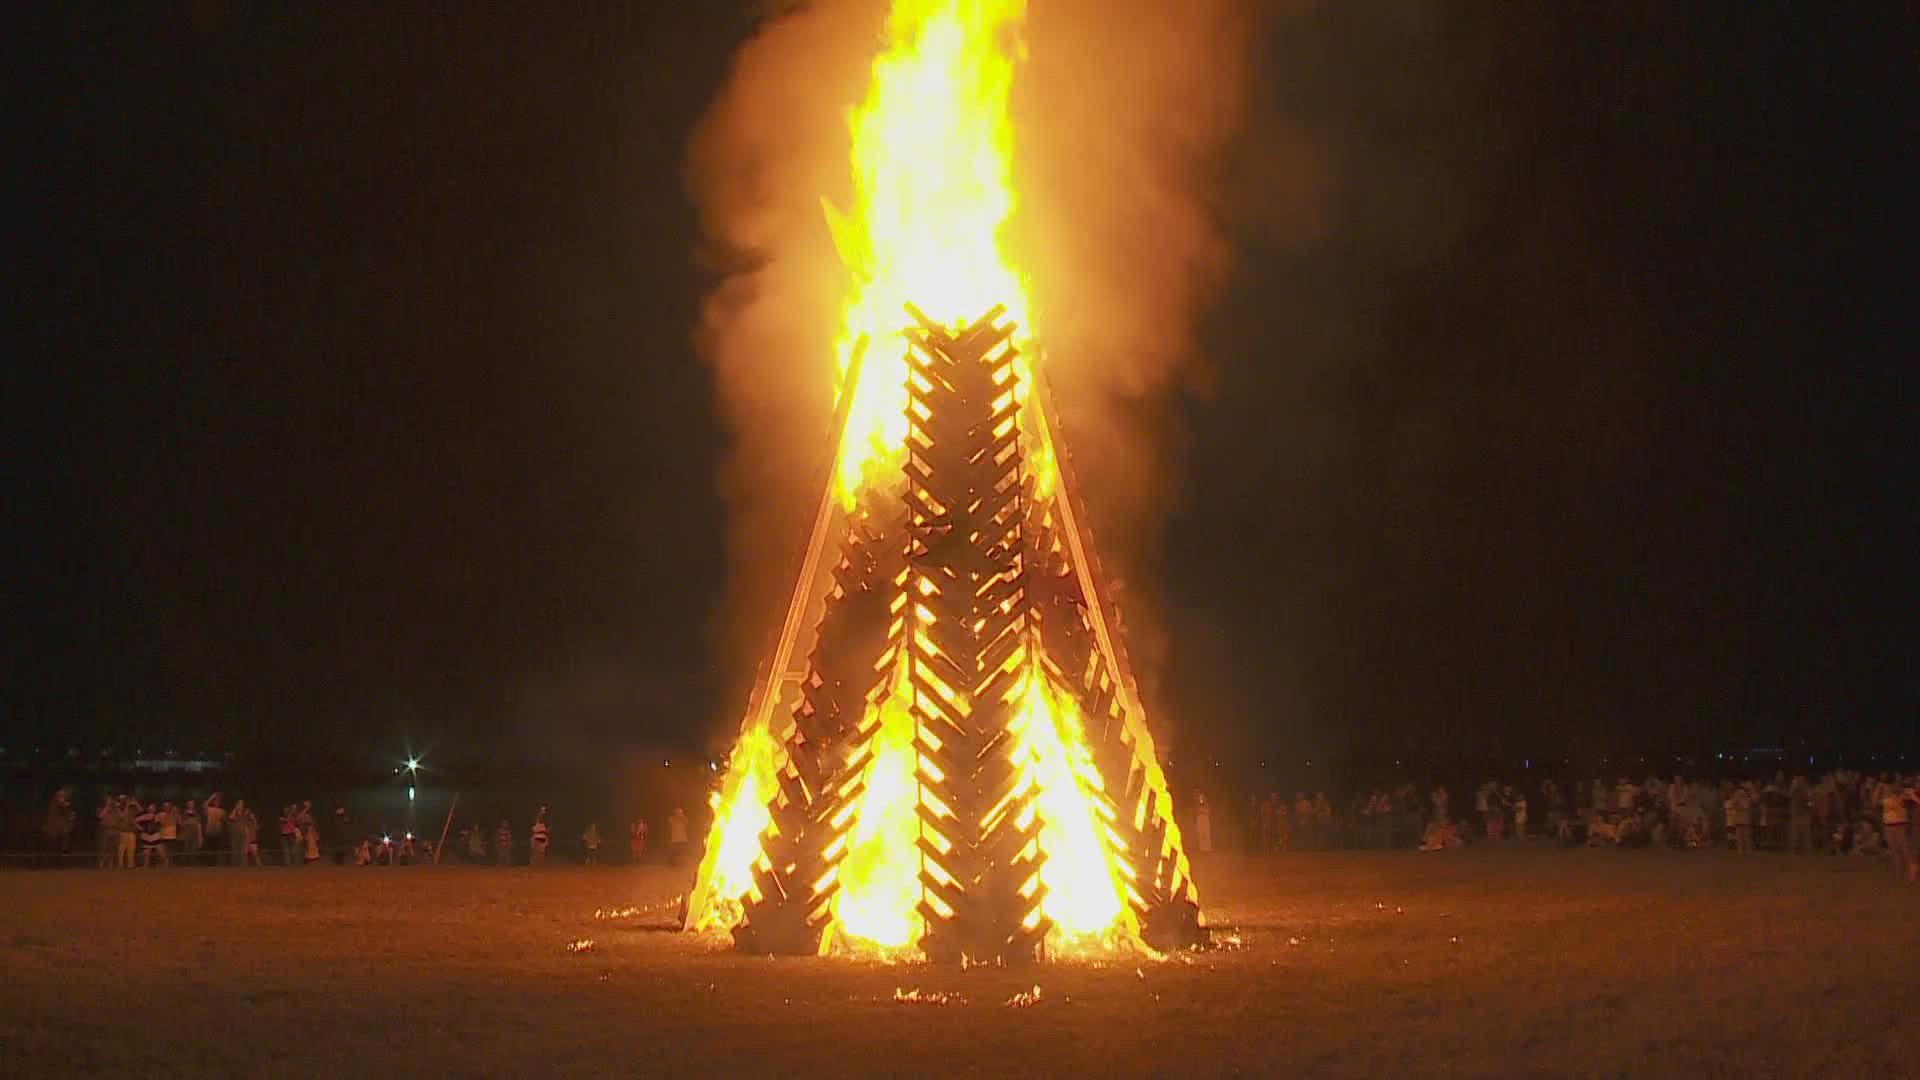 "The bonfire is an opportunity for us to showcase our homegrown talent."